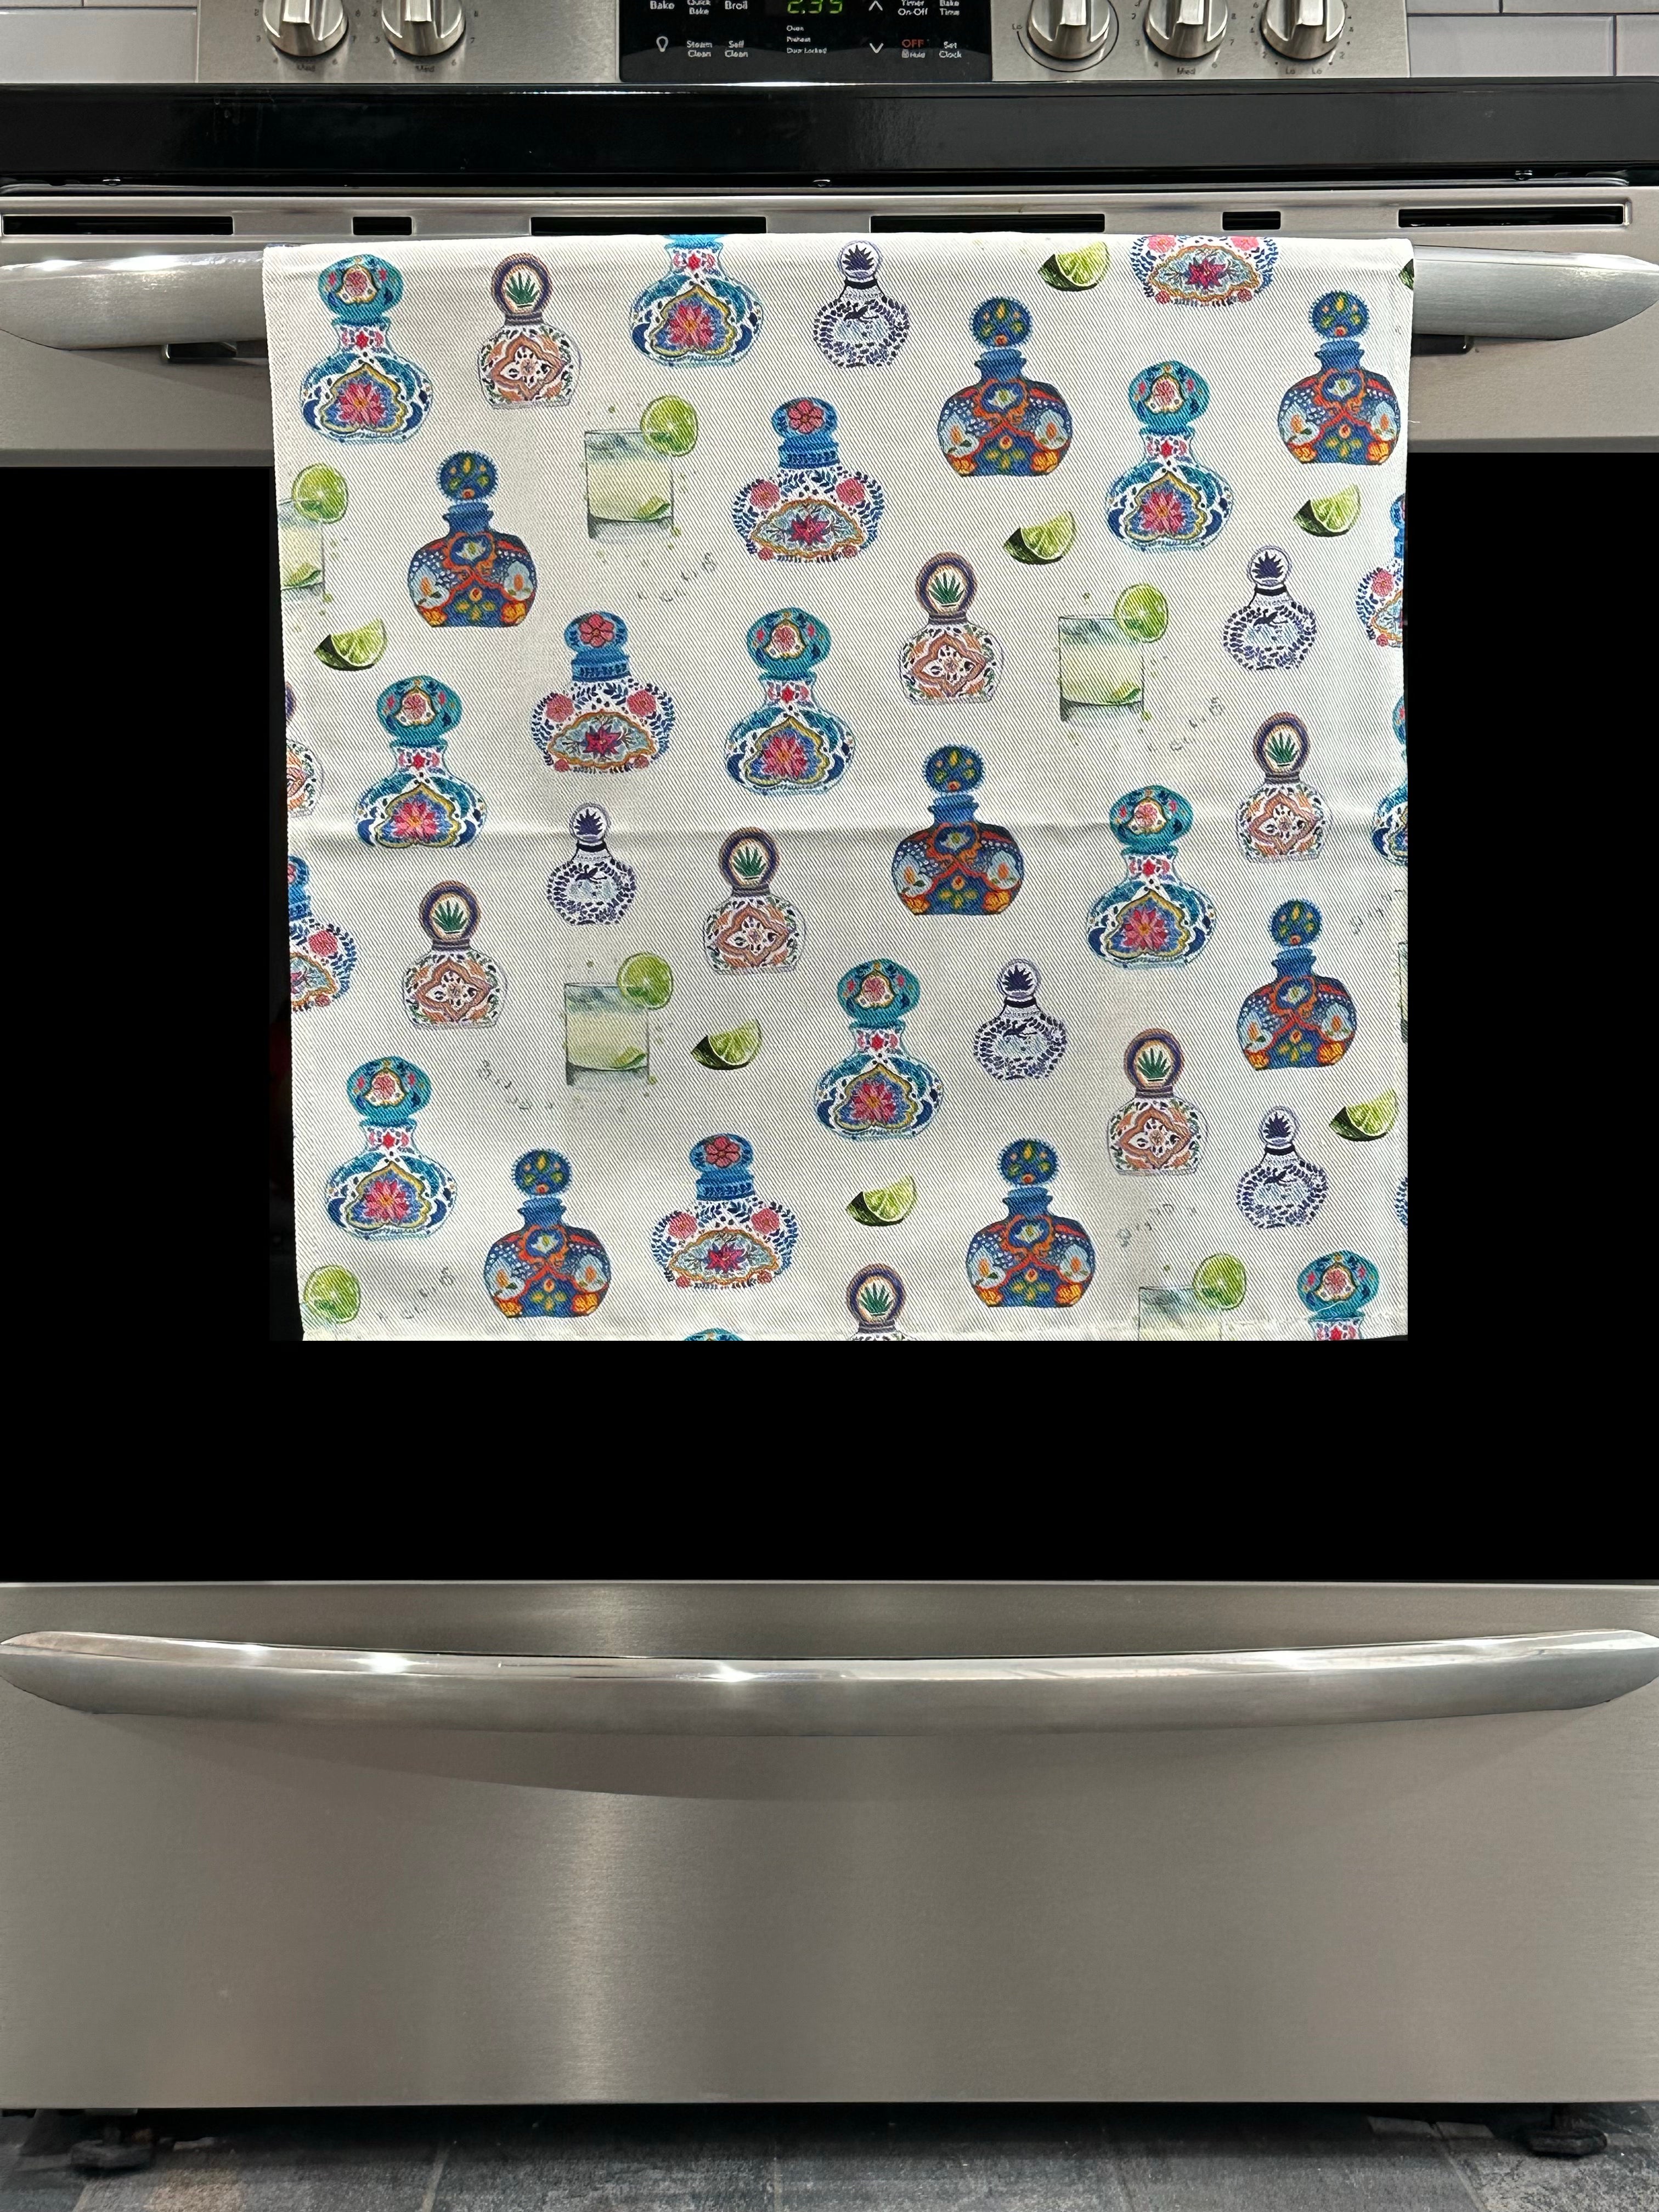 Kitchen Towel featuring a multicolor tequila bottle and drink design. Pictured here hanging on a stove.